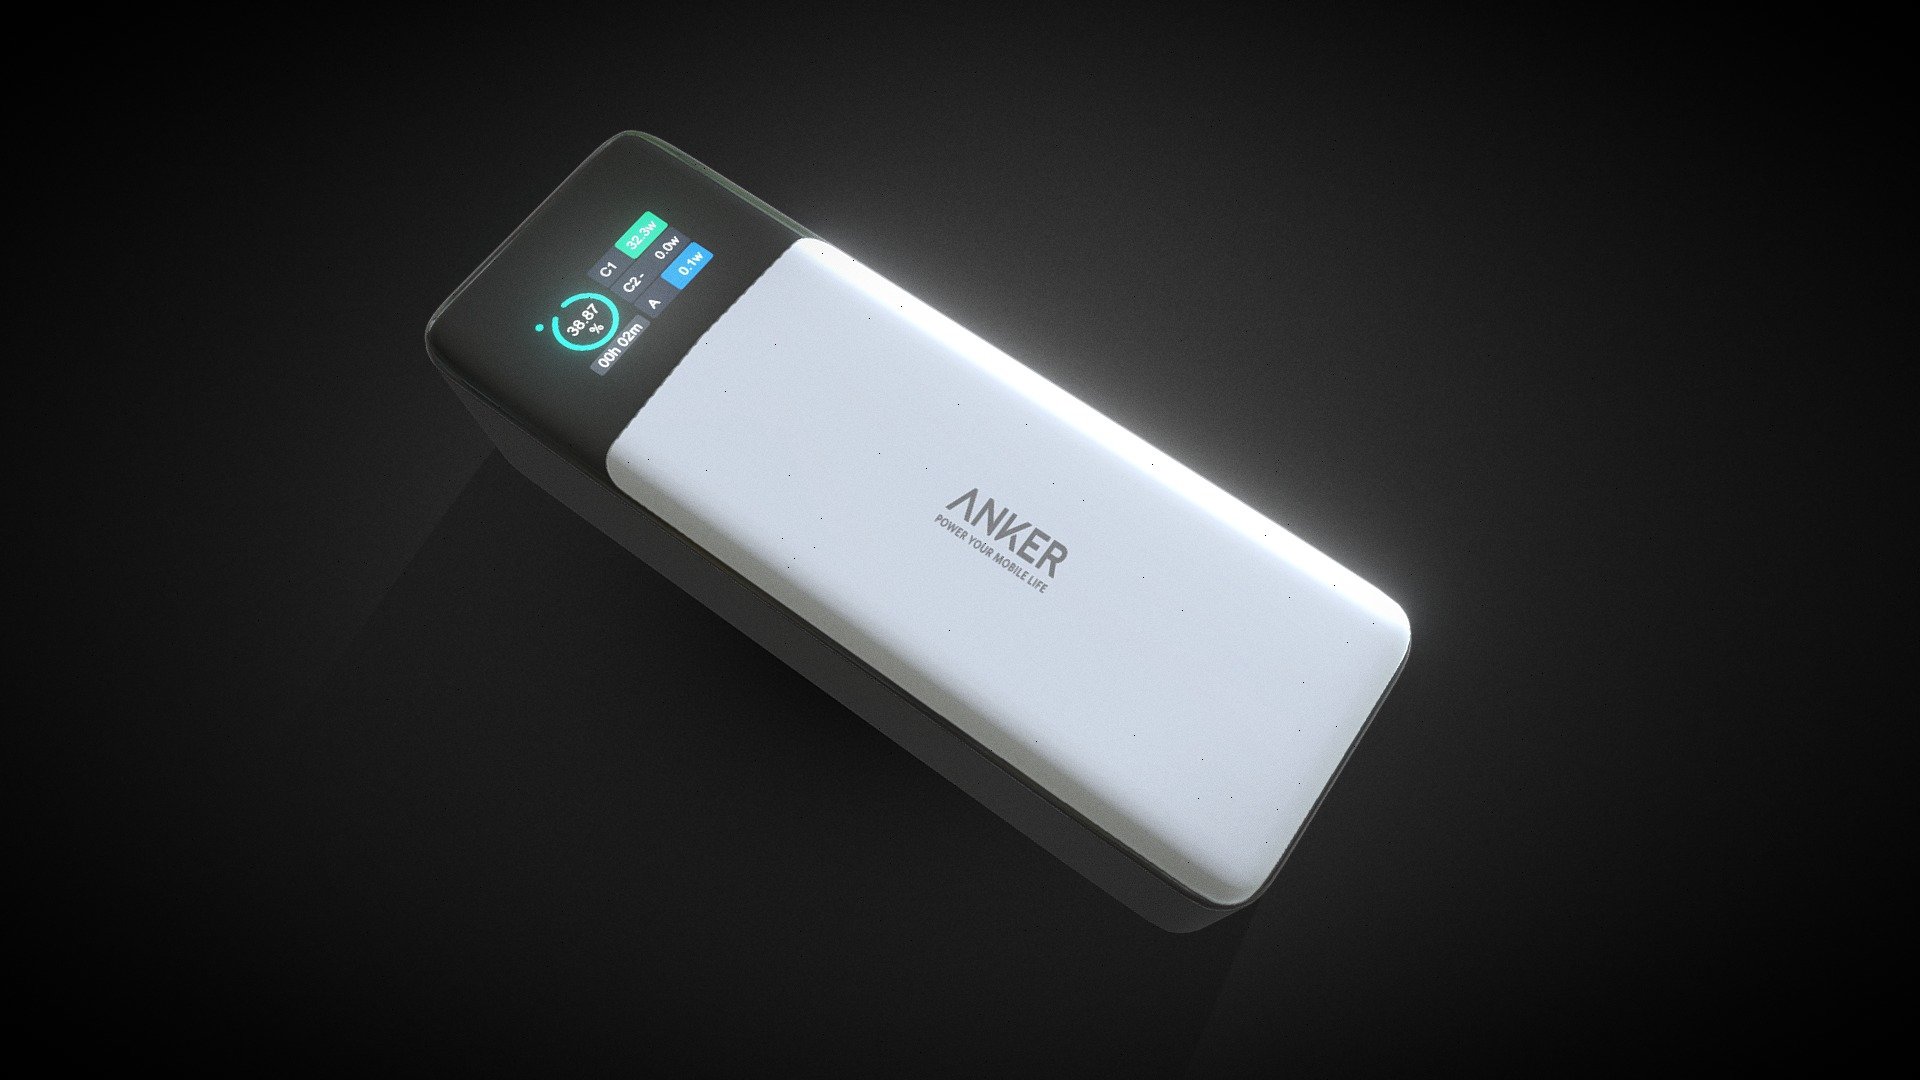 This high-quality 3D model represents an Anker Power Bank, a portable charger designed to provide reliable power on the go. The model accurately depicts the physical design and features of the power bank.

The power bank is designed as a compact rectangular shape, easy to hold and carry in a pocket or bag The front face of the power bank is adorned with the Anker logo, which is accurately represented in the model.

The top surface of the power bank showcases the power indicator lights, which are depicted as a series of LED indicators to show the remaining battery capacity. The sides of the power bank feature the input and output ports, as well as buttons for power control and additional functionalities such as flashlight mode.

Note: Please remember to respect intellectual property rights and ensure you have the necessary permissions to use and distribute any 3D models or designs based on copyrighted products like the Anker Power Bank - Anker Power Bank - Buy Royalty Free 3D model by Sujit mishra (@sujitanshumishra) 3d model